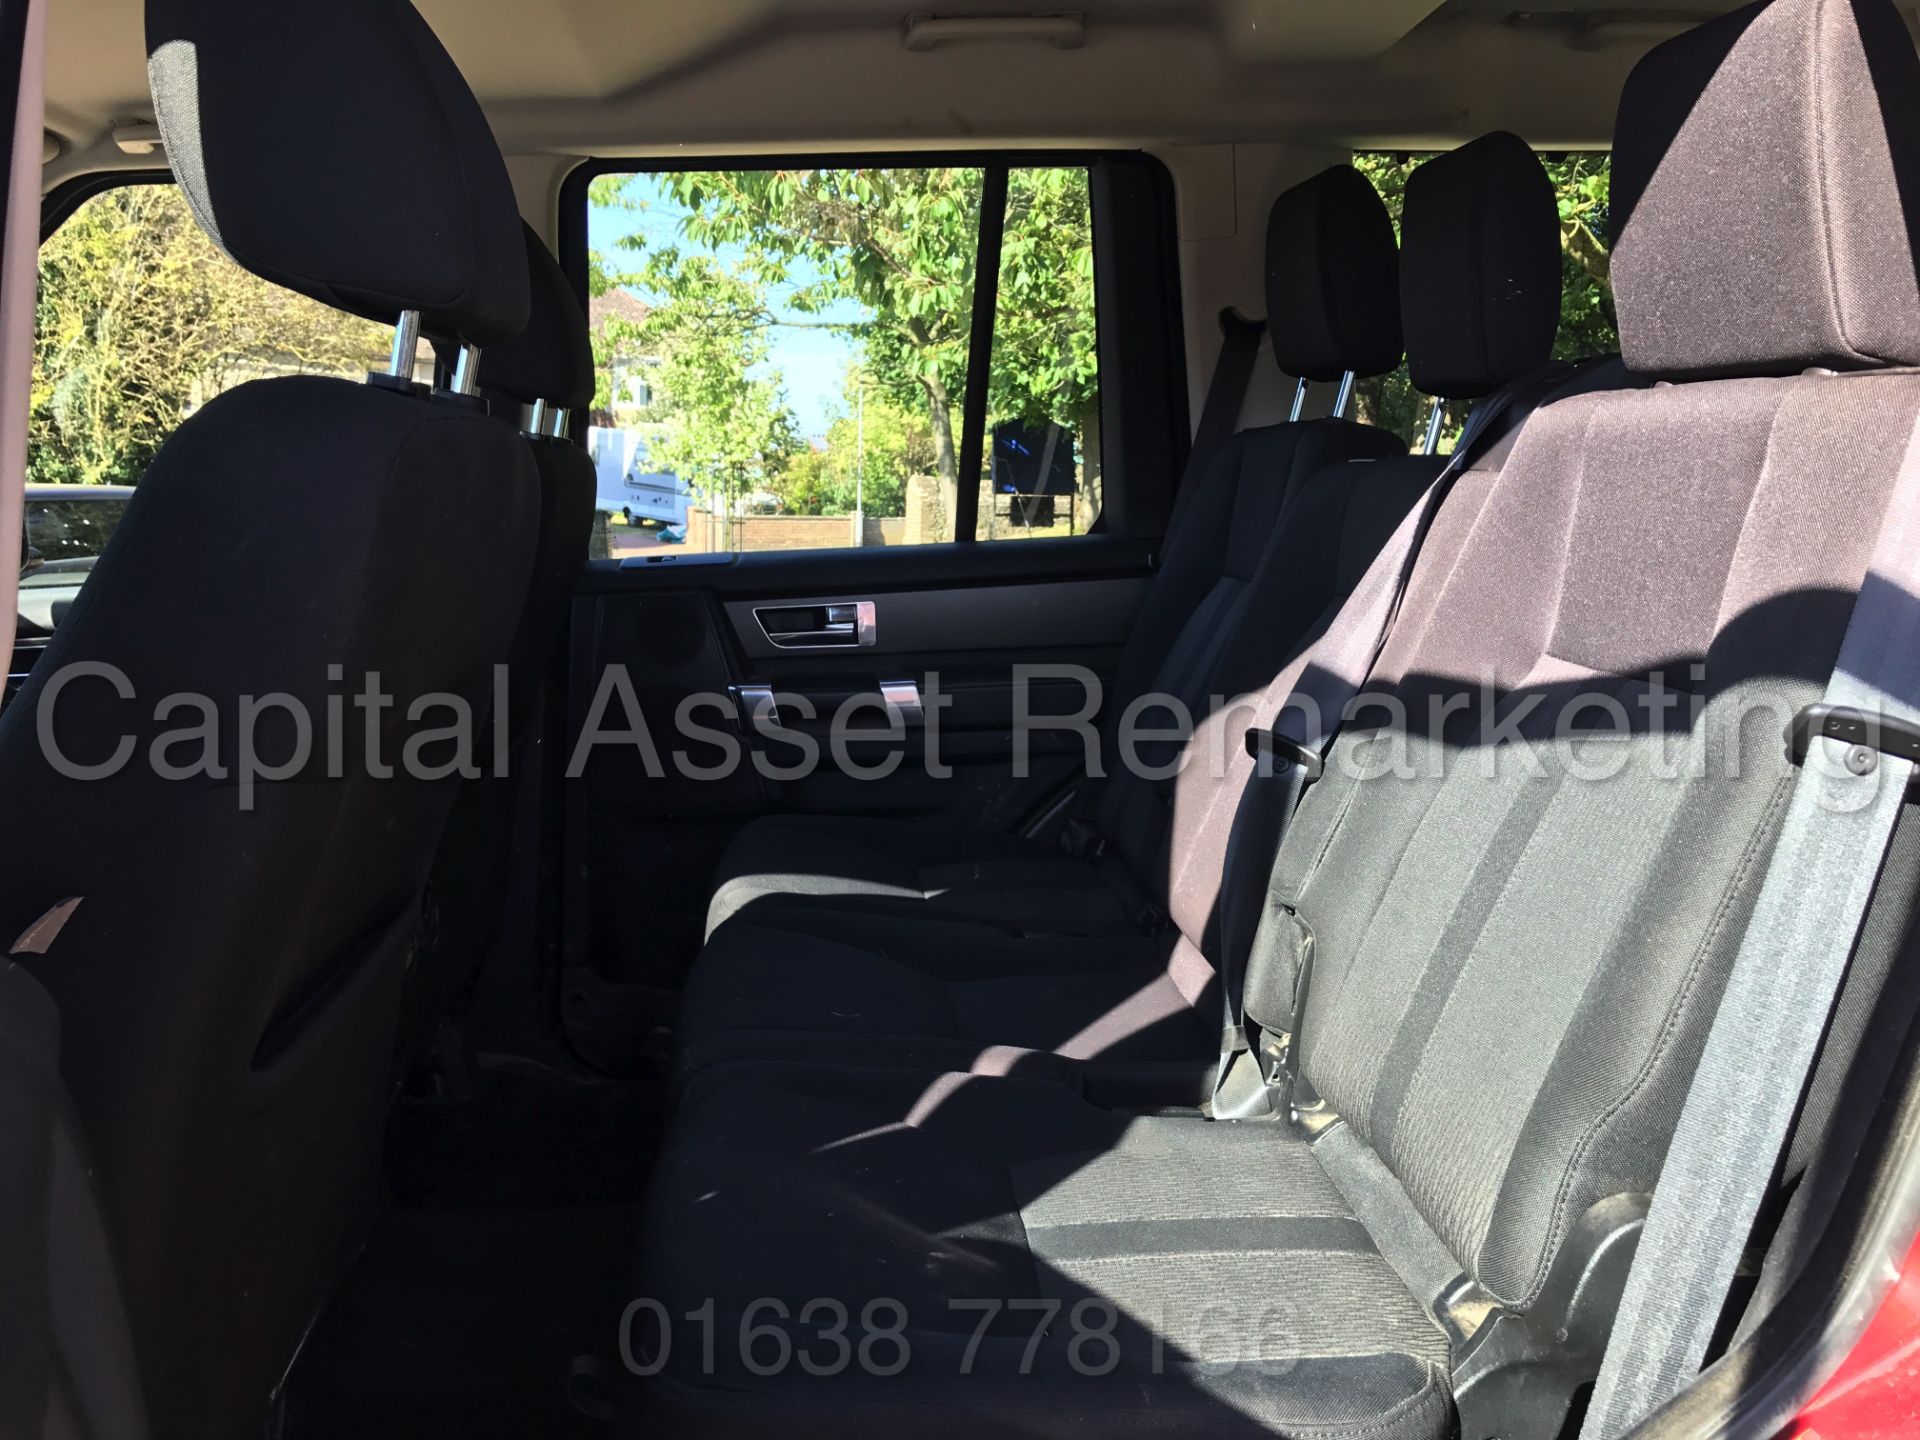 (On Sale) LAND ROVER DISCOVERY 4 (2011 MODEL) '3.0 SDV6 - 245 BHP - AUTO TIP TRONIC - 7 SEATER' - Image 15 of 31